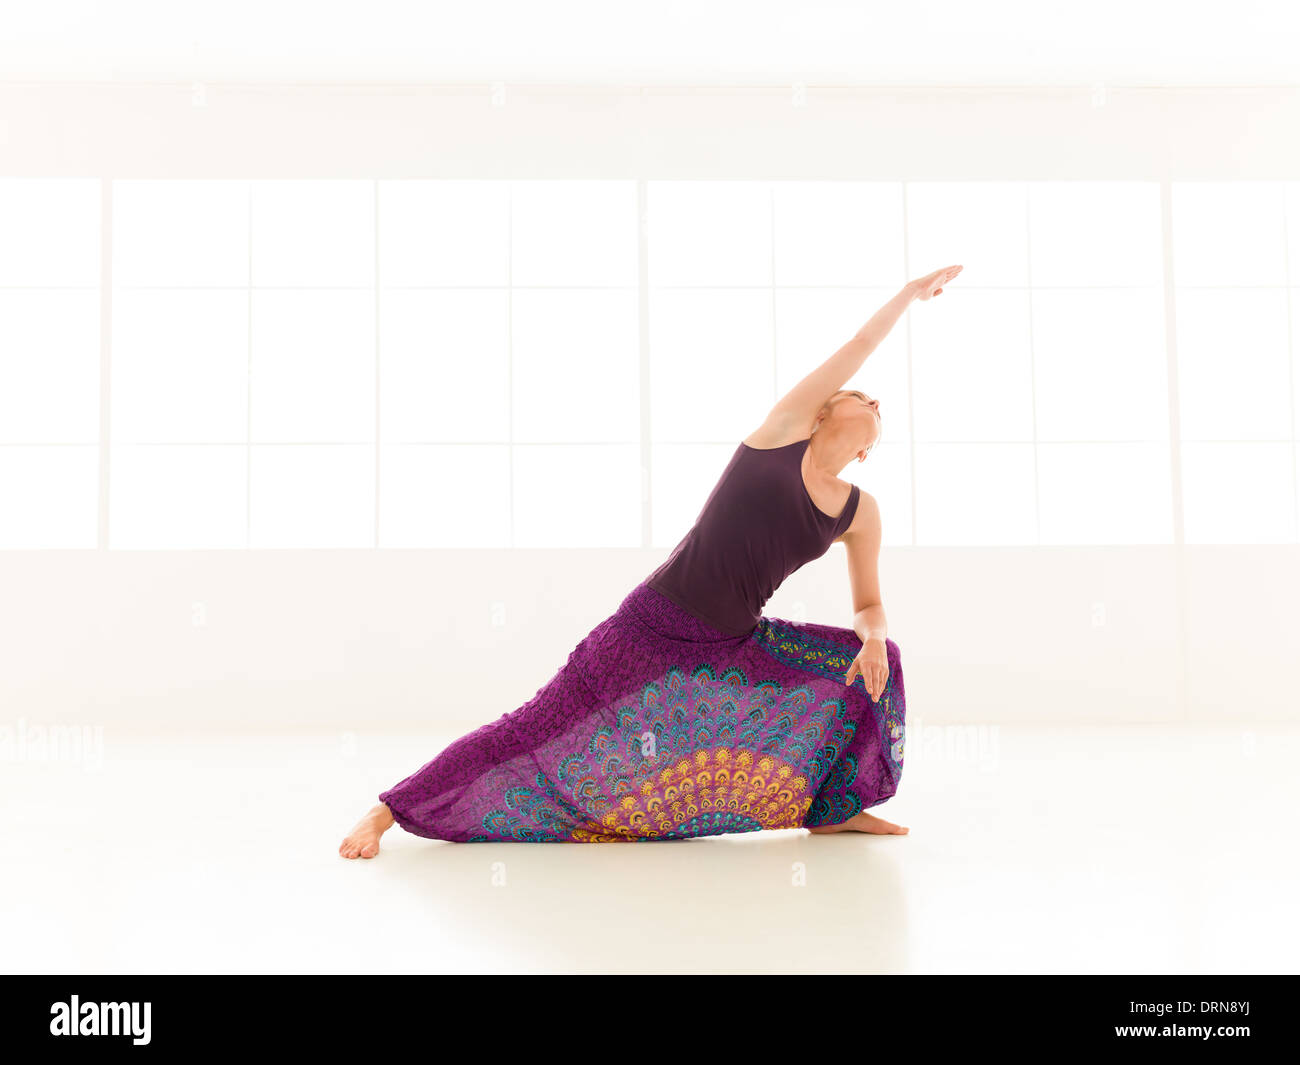 full body view of young slim woman in yoga posture, dressed icolorful indor studio Stock Photo